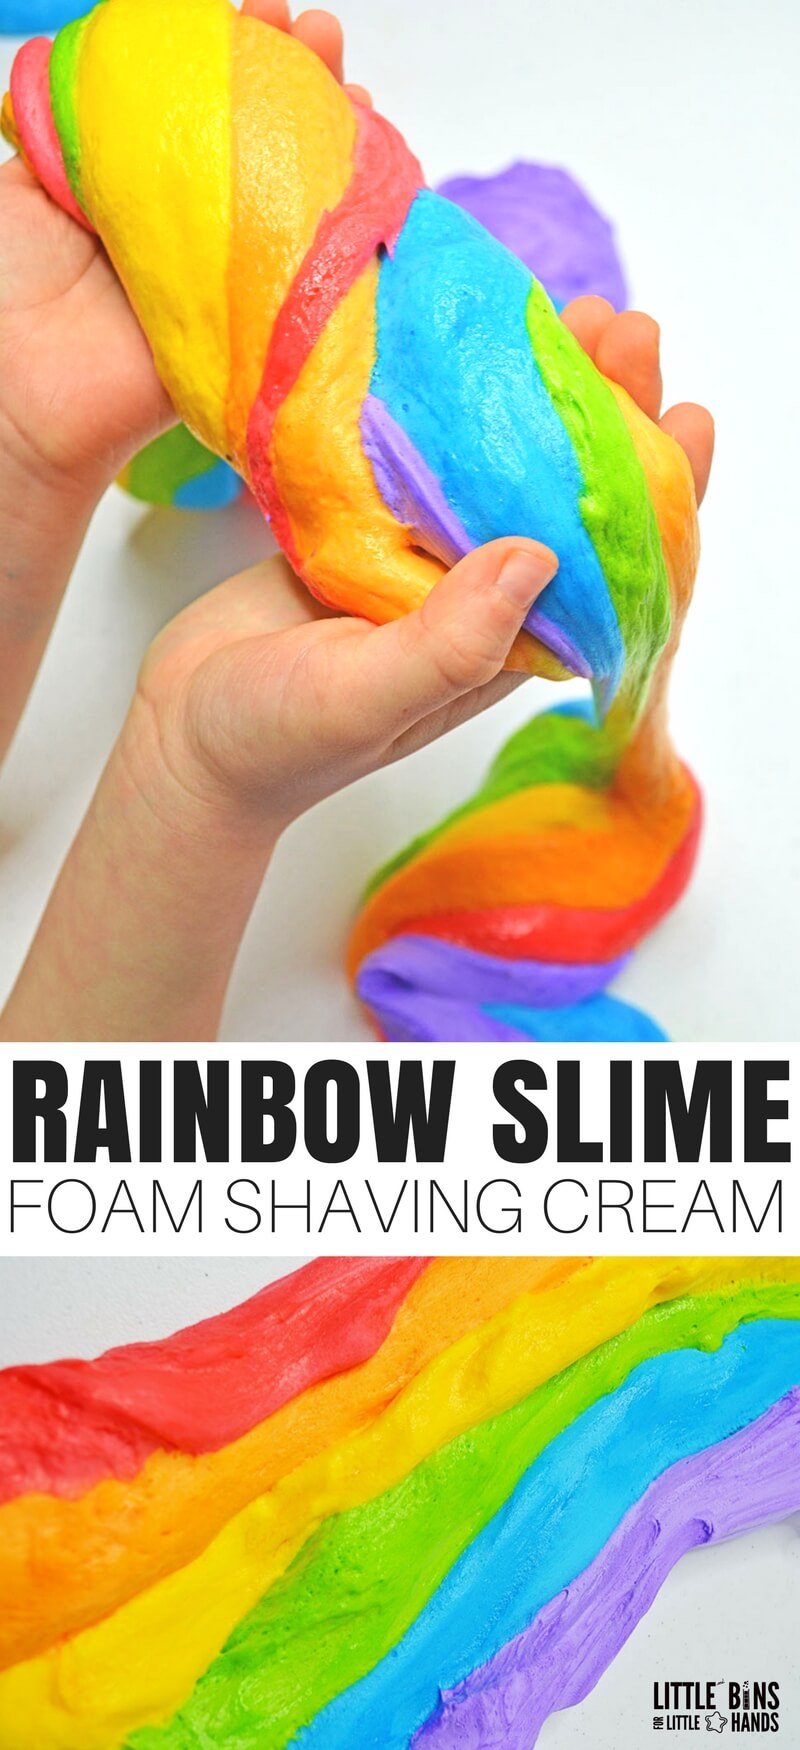 If you want to know how to make slime fluffy, you want to read about our awesome shaving cream slime! We made a rainbow of colors that are light and fluffy thanks to an extra special ingredient and our favorite basic slime recipe! Make the colors of the rainbow and swirl them together or just make your favorite color!